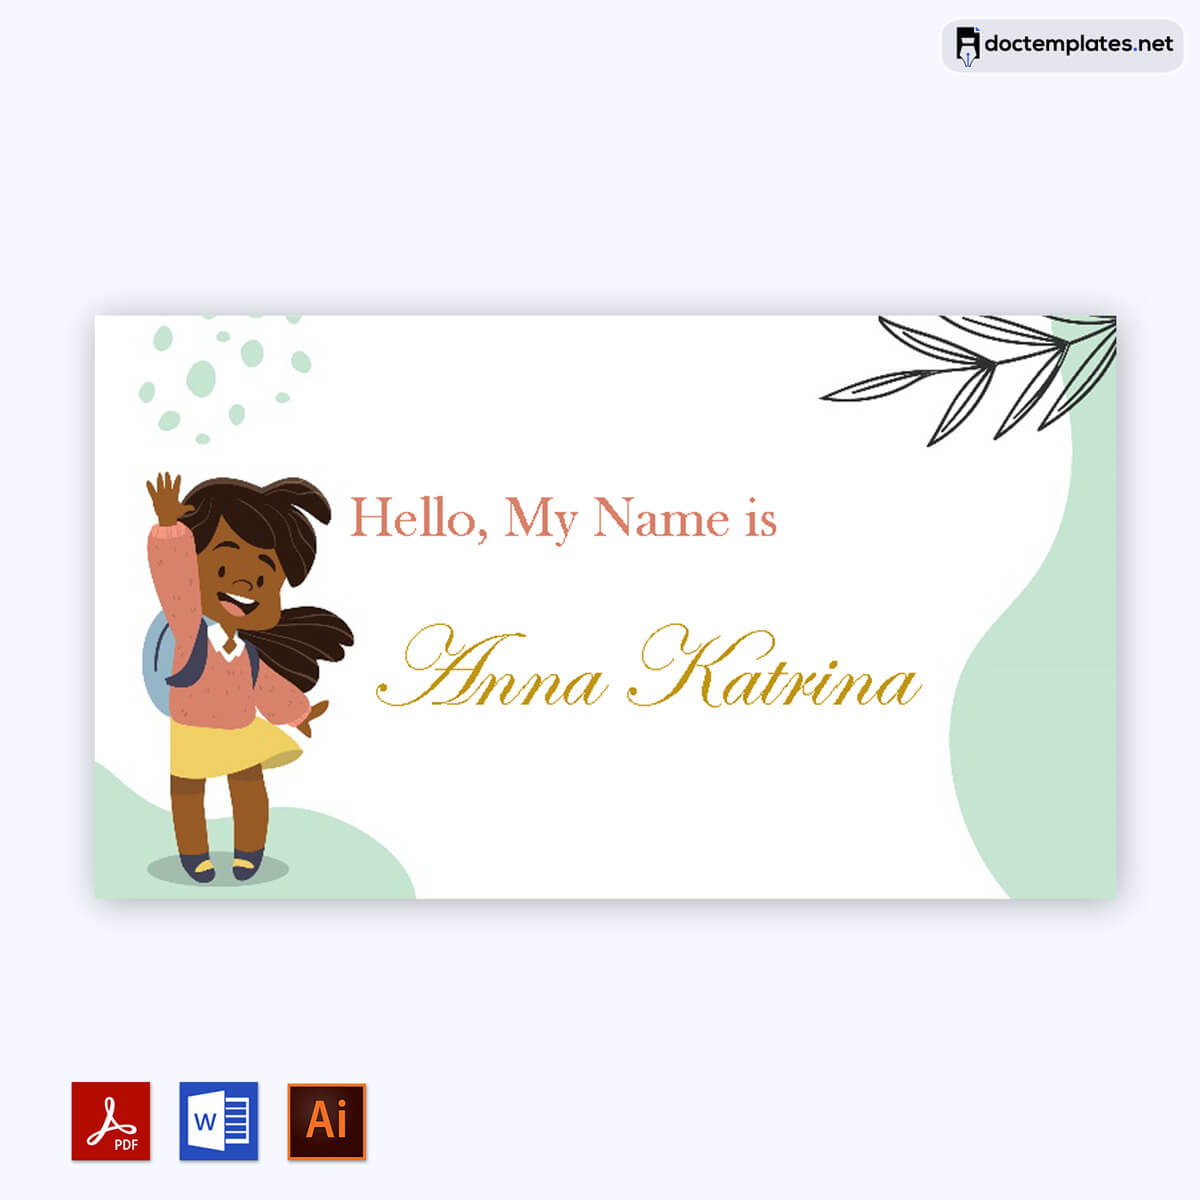 Image of School Name Tag Template free printable Word
School Name Tag Template free printable Word